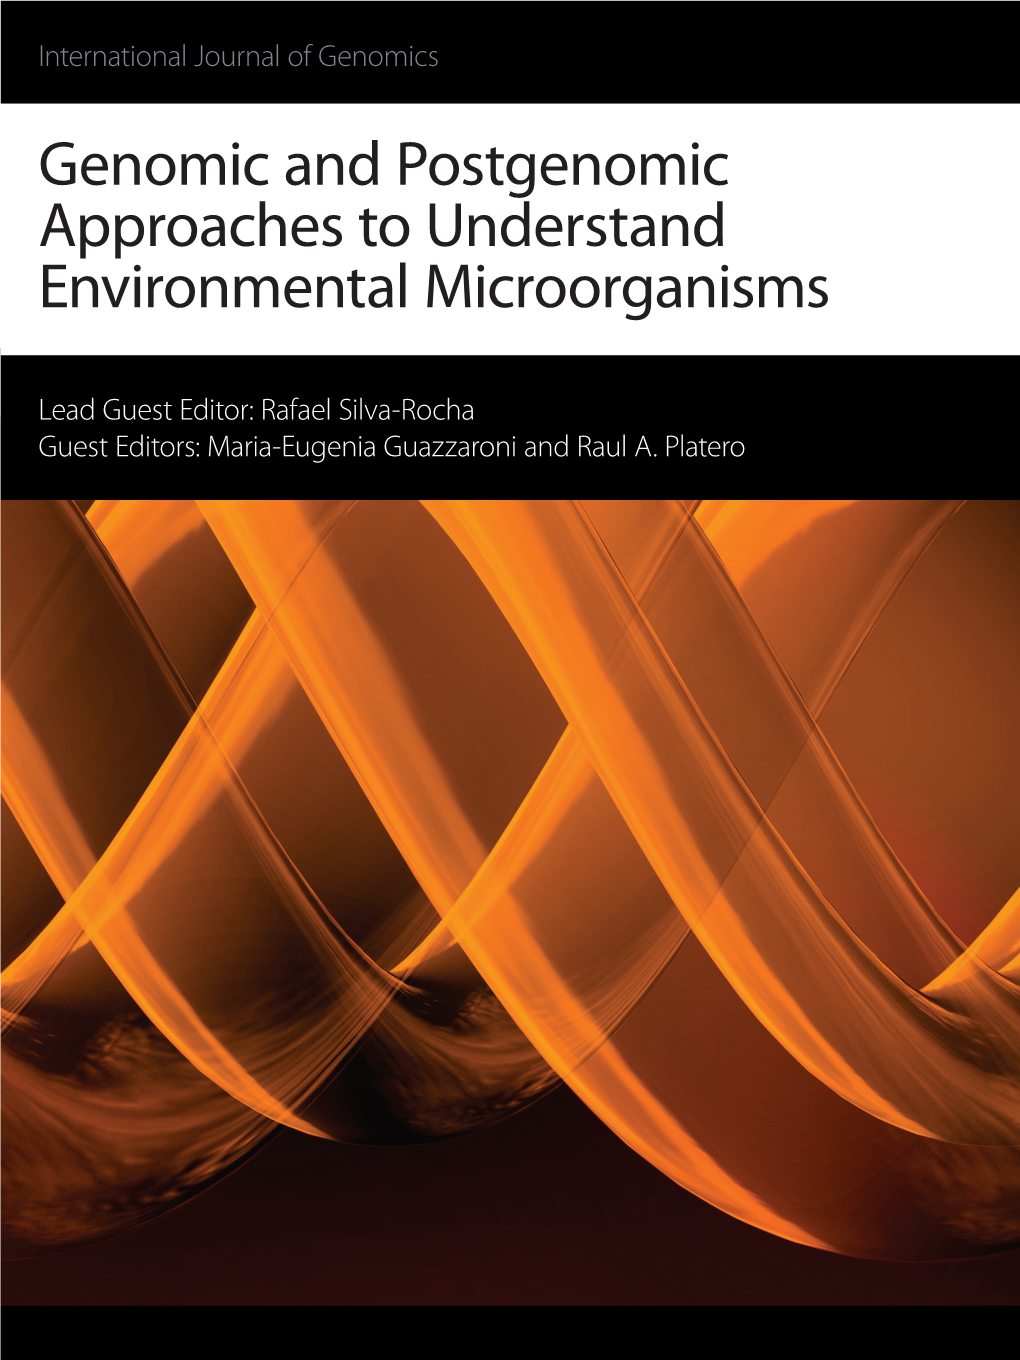 Genomic and Postgenomic Approaches to Understand Environmental Microorganisms